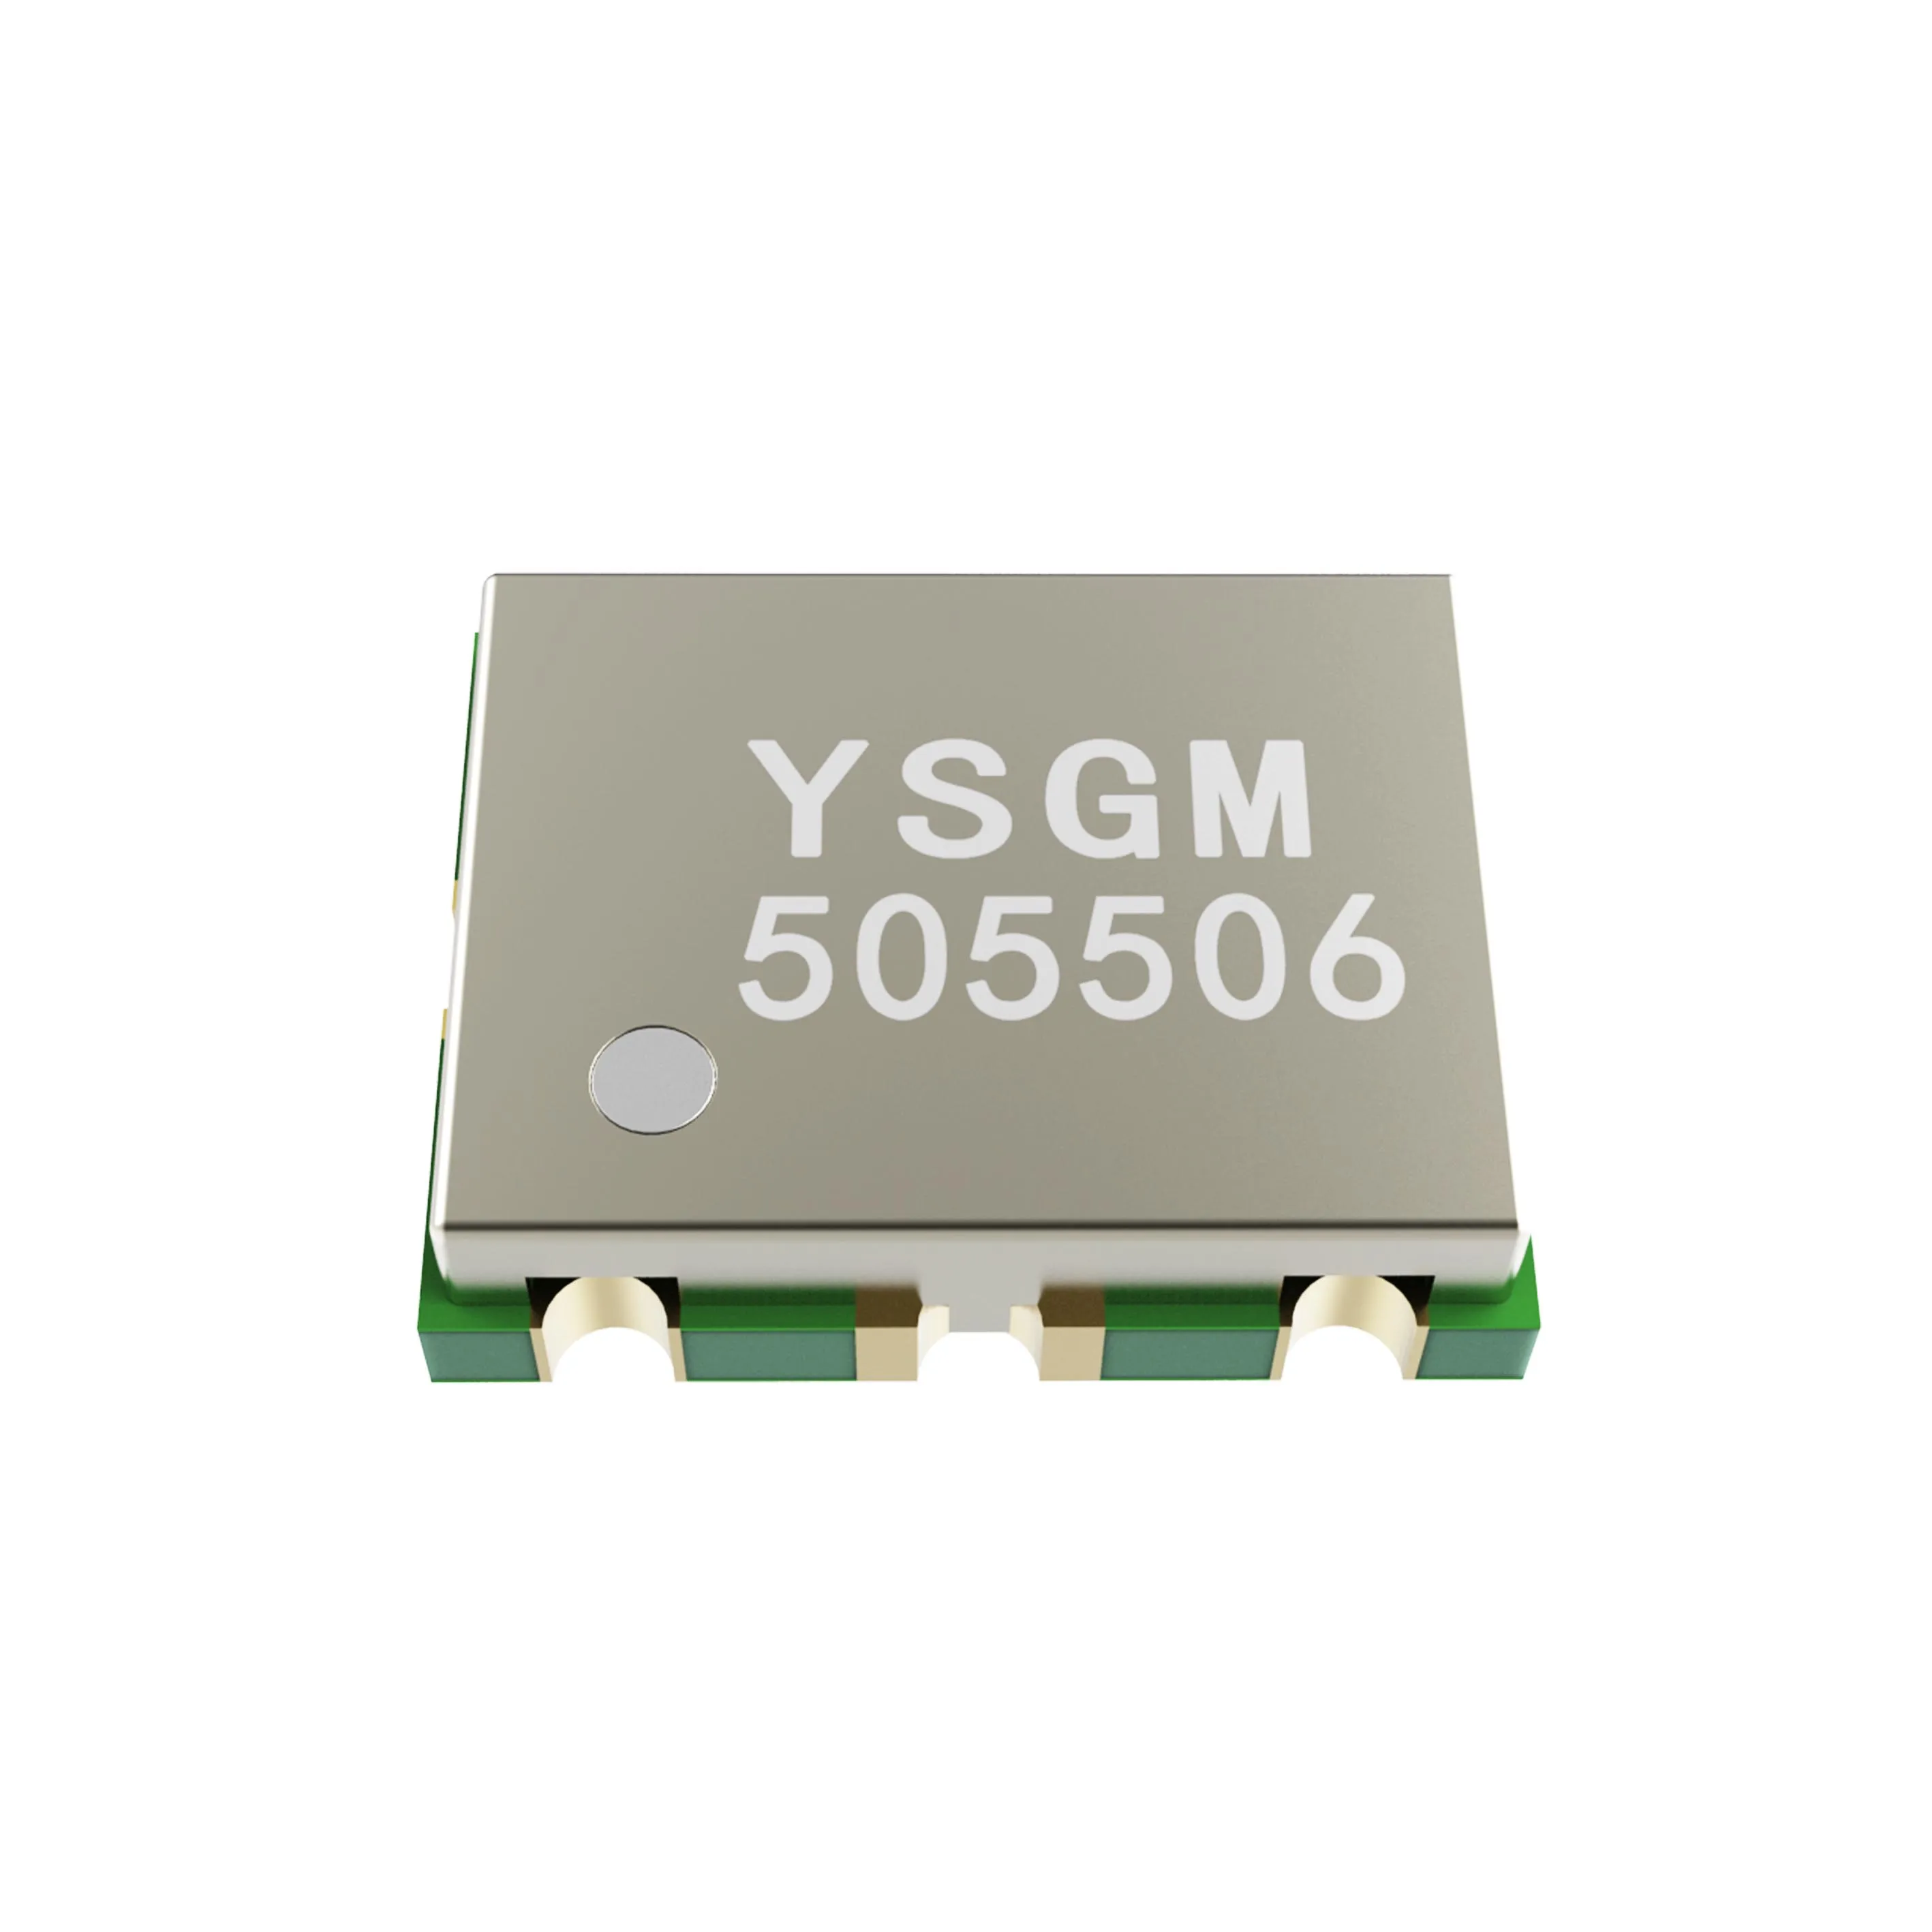 VCO Voltage Controlled Oscillator with Buffer Amplifier for IEEE 802.11a/n/ac 5150MHz-5350MHz 1pcs lot hmc582lp5e hmc582 voltage controlled oscillator oscillator 12 4ghz 5 25v qfn32 new